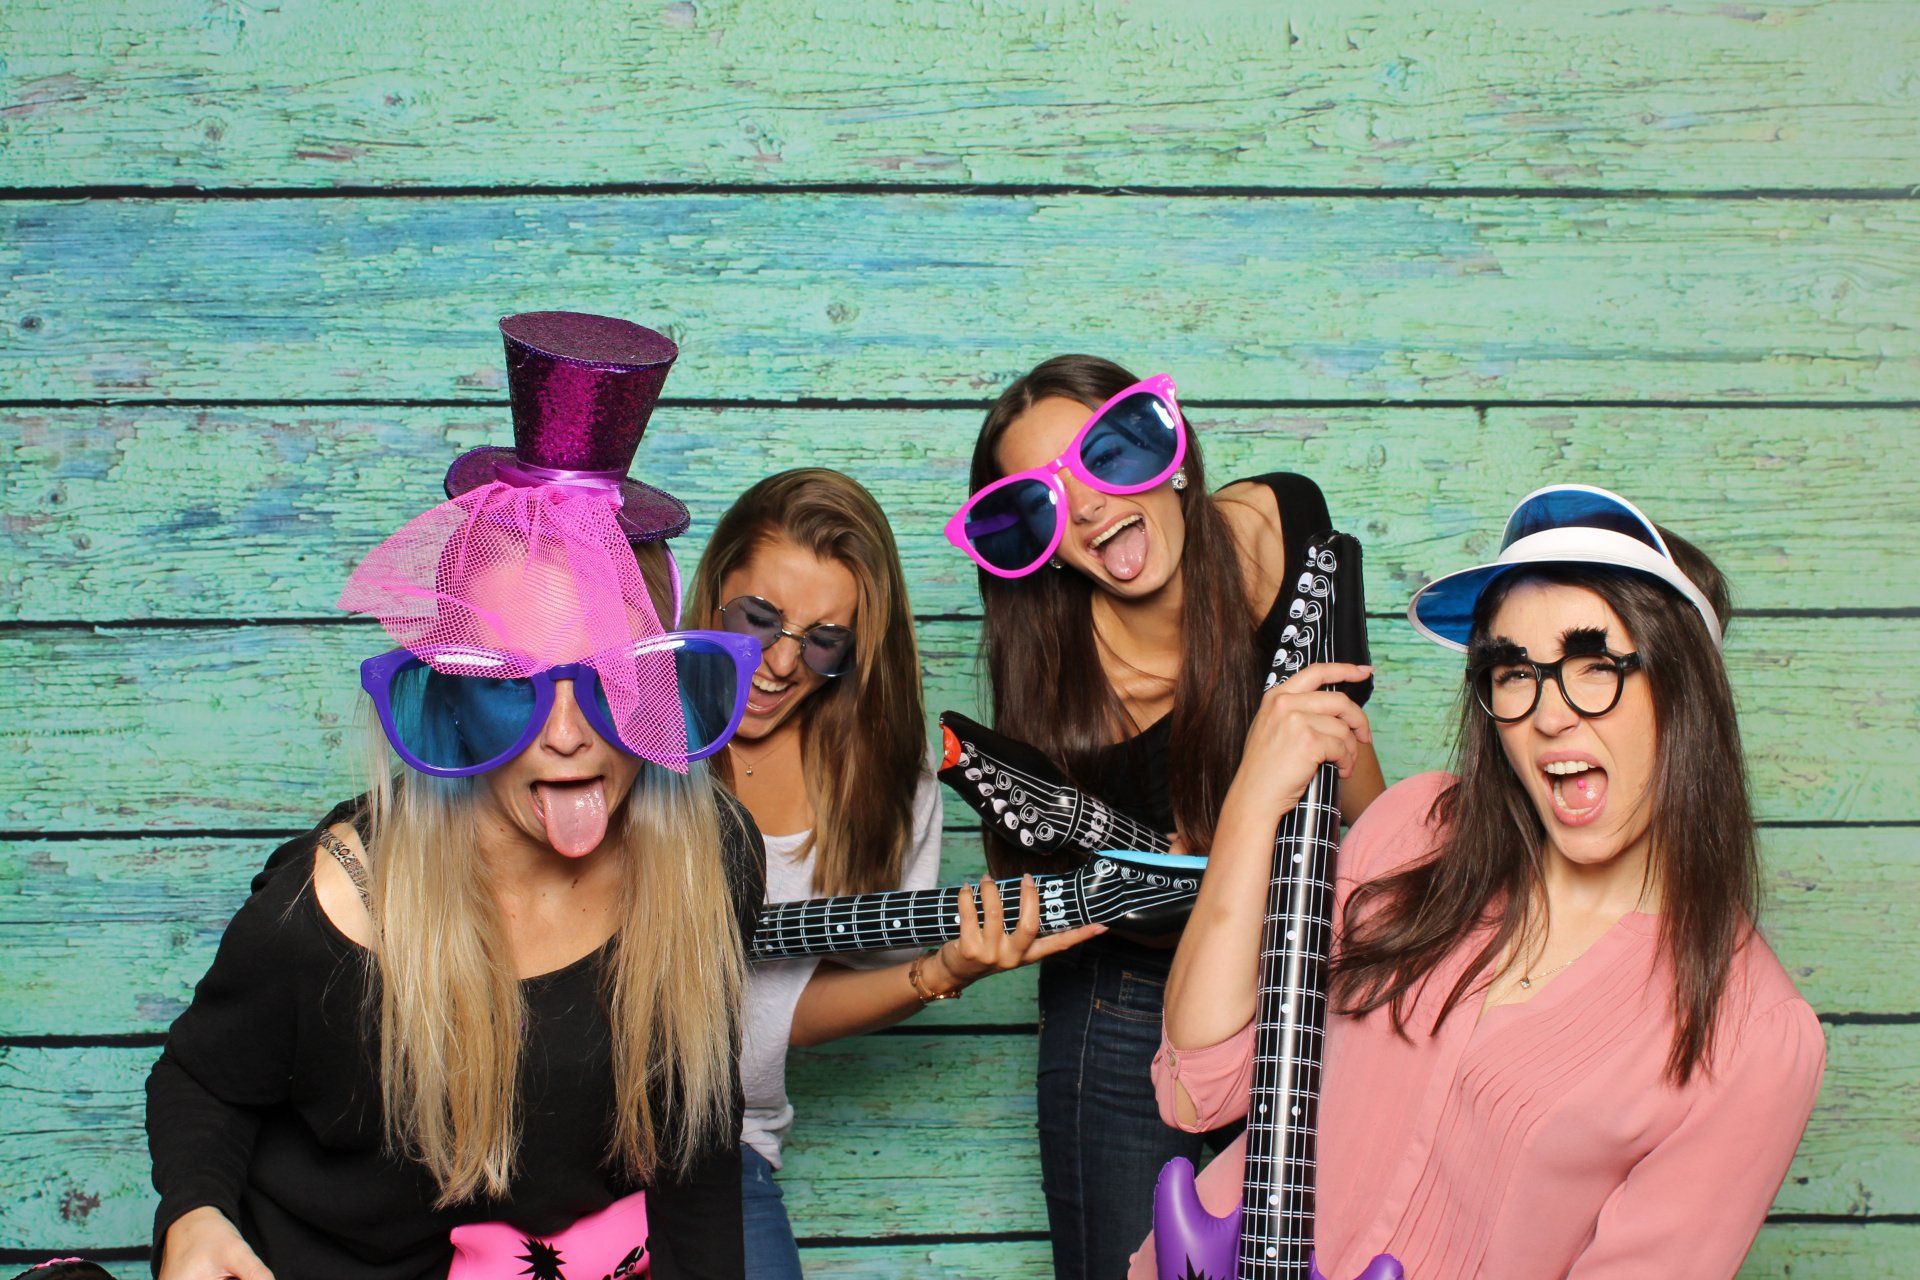 4 girls in a great time in a photo booth